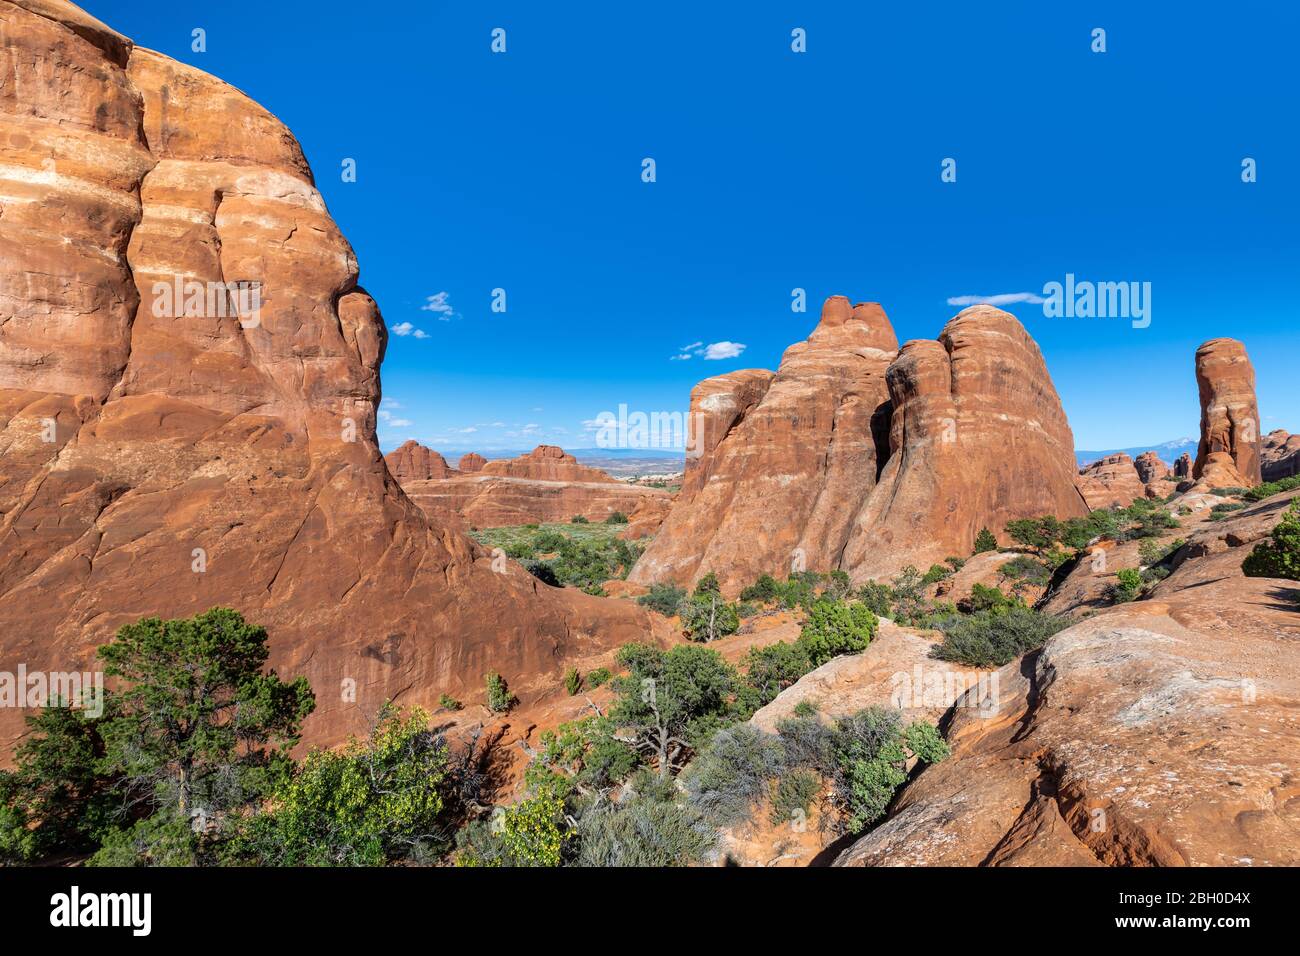 A lunar landscape showing a number of strange red sandstone formations in Devil's Garden trail, at Arches National Park Stock Photo